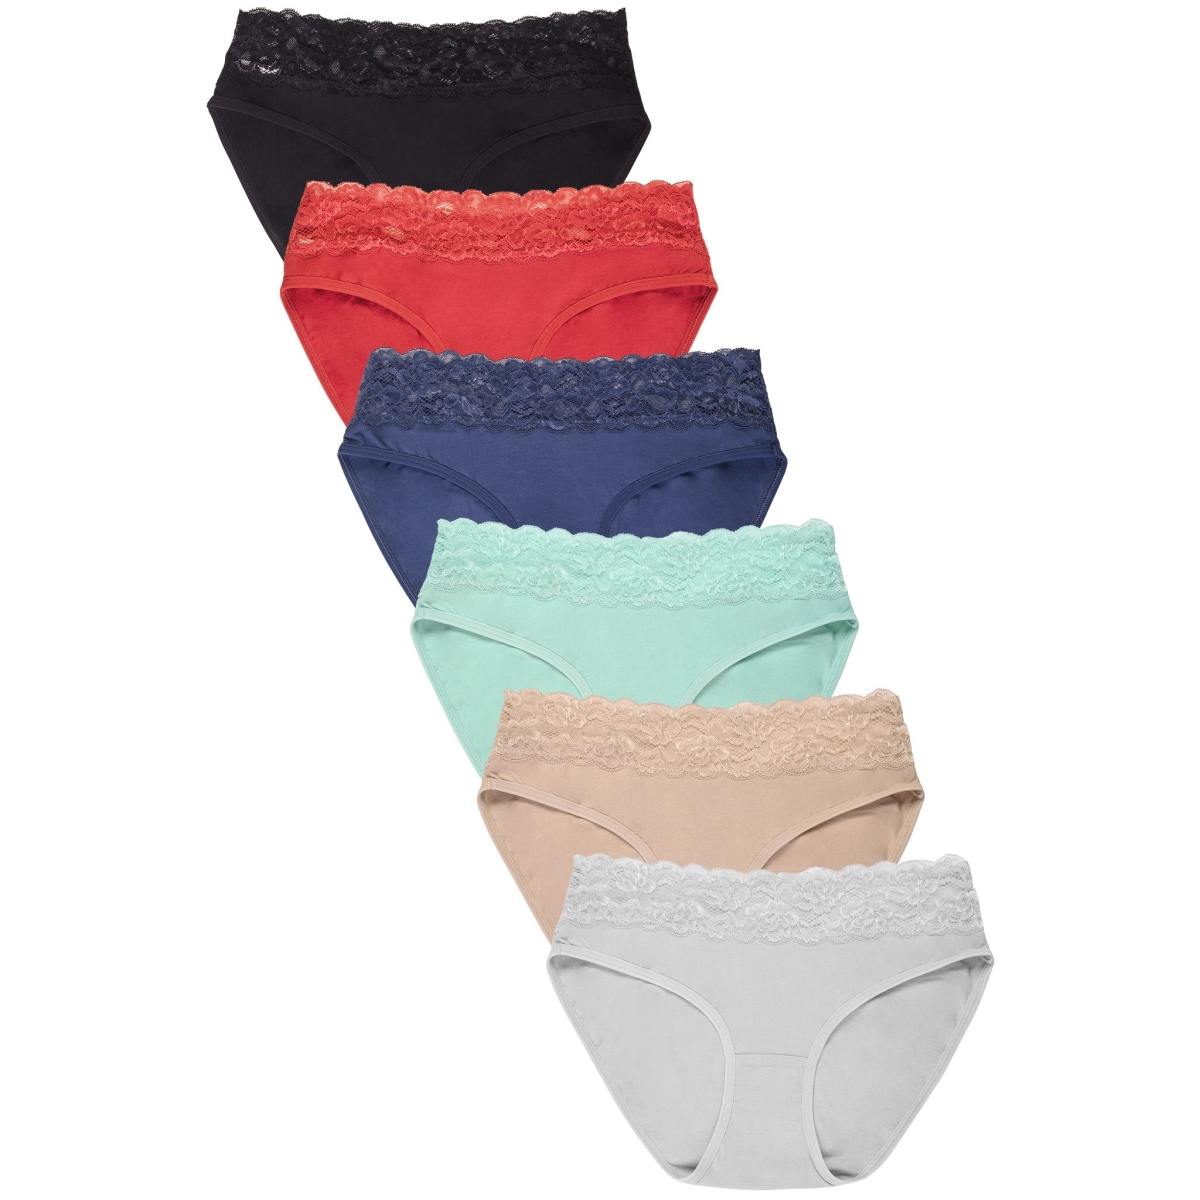 Picture of 247 Frenzy 247-LP1394CK3-XL Womens Essentials Cotton Stretch Bikini Panty Underwear - Assorted Color - Extra Large - Pack of 6